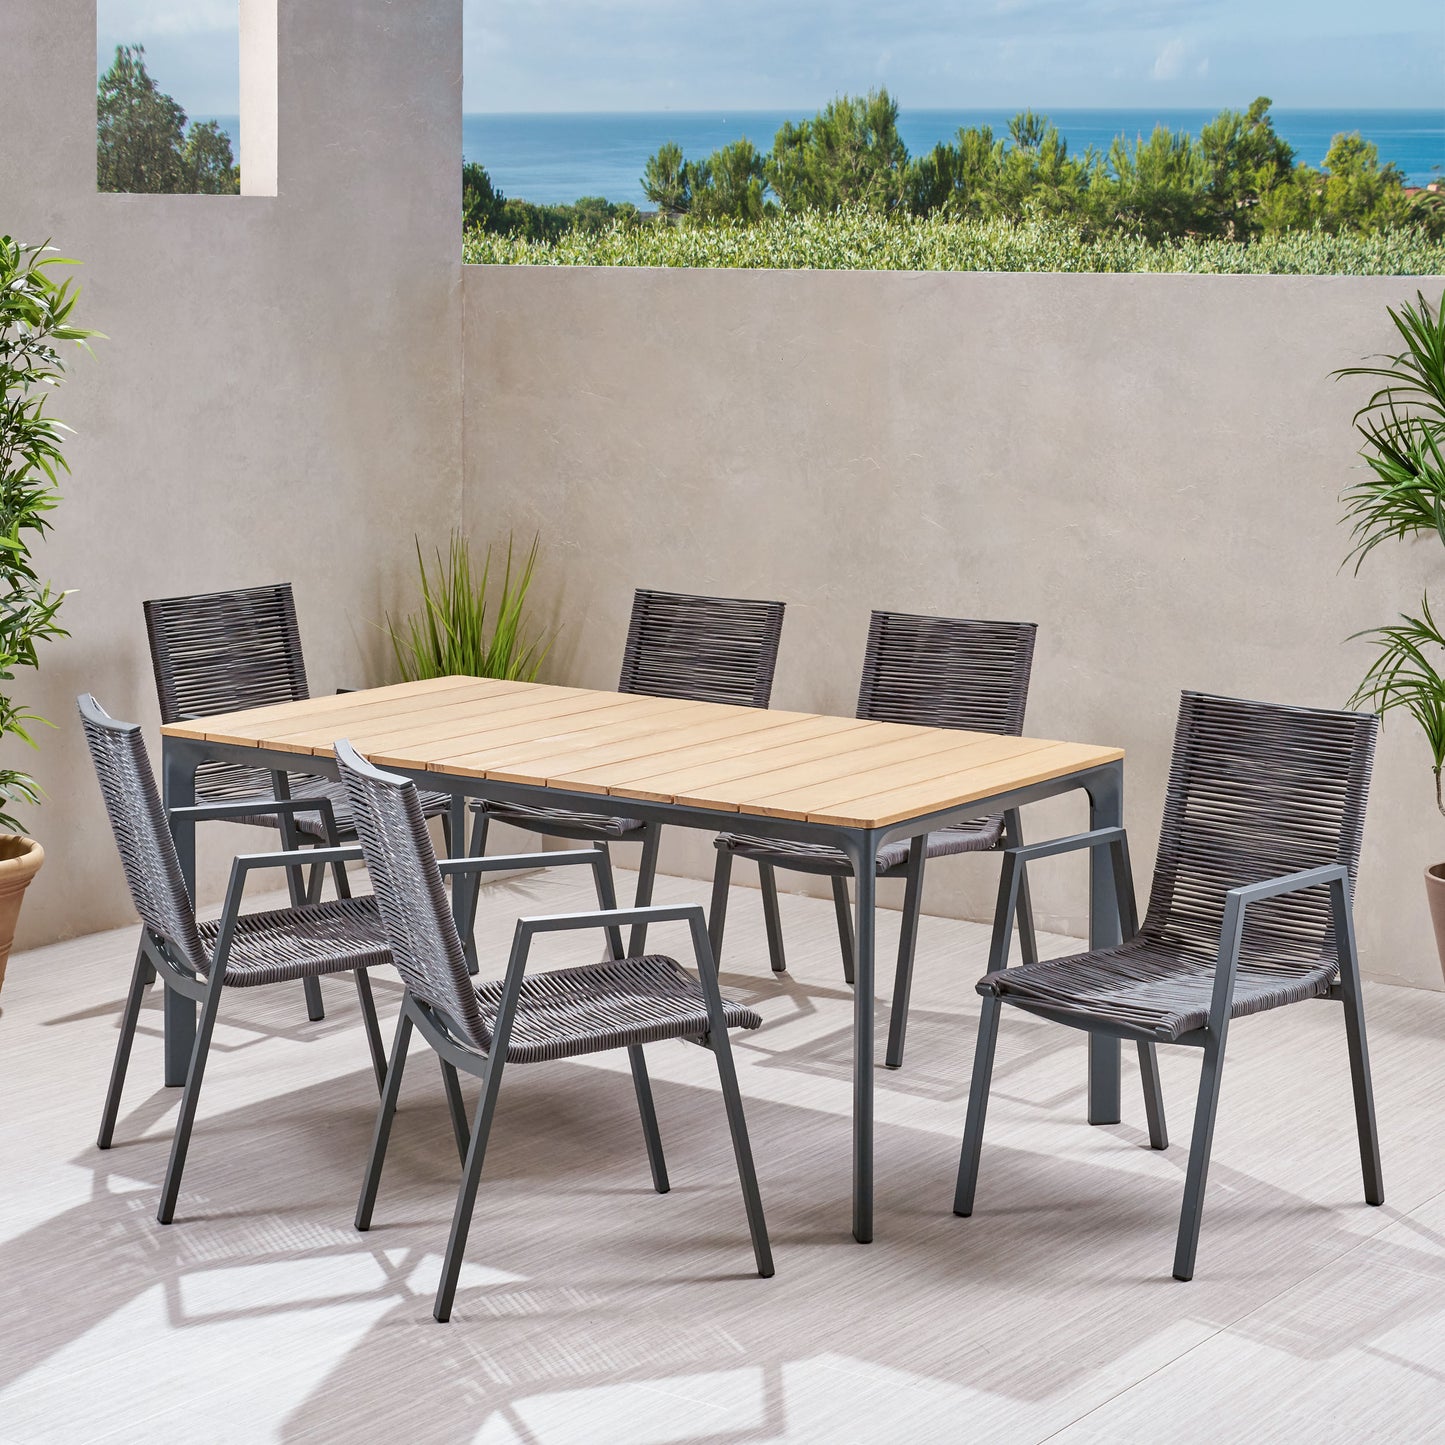 Severide Outdoor Modern 6 Seater Aluminum Dining Set with Eucalyptus Table Top